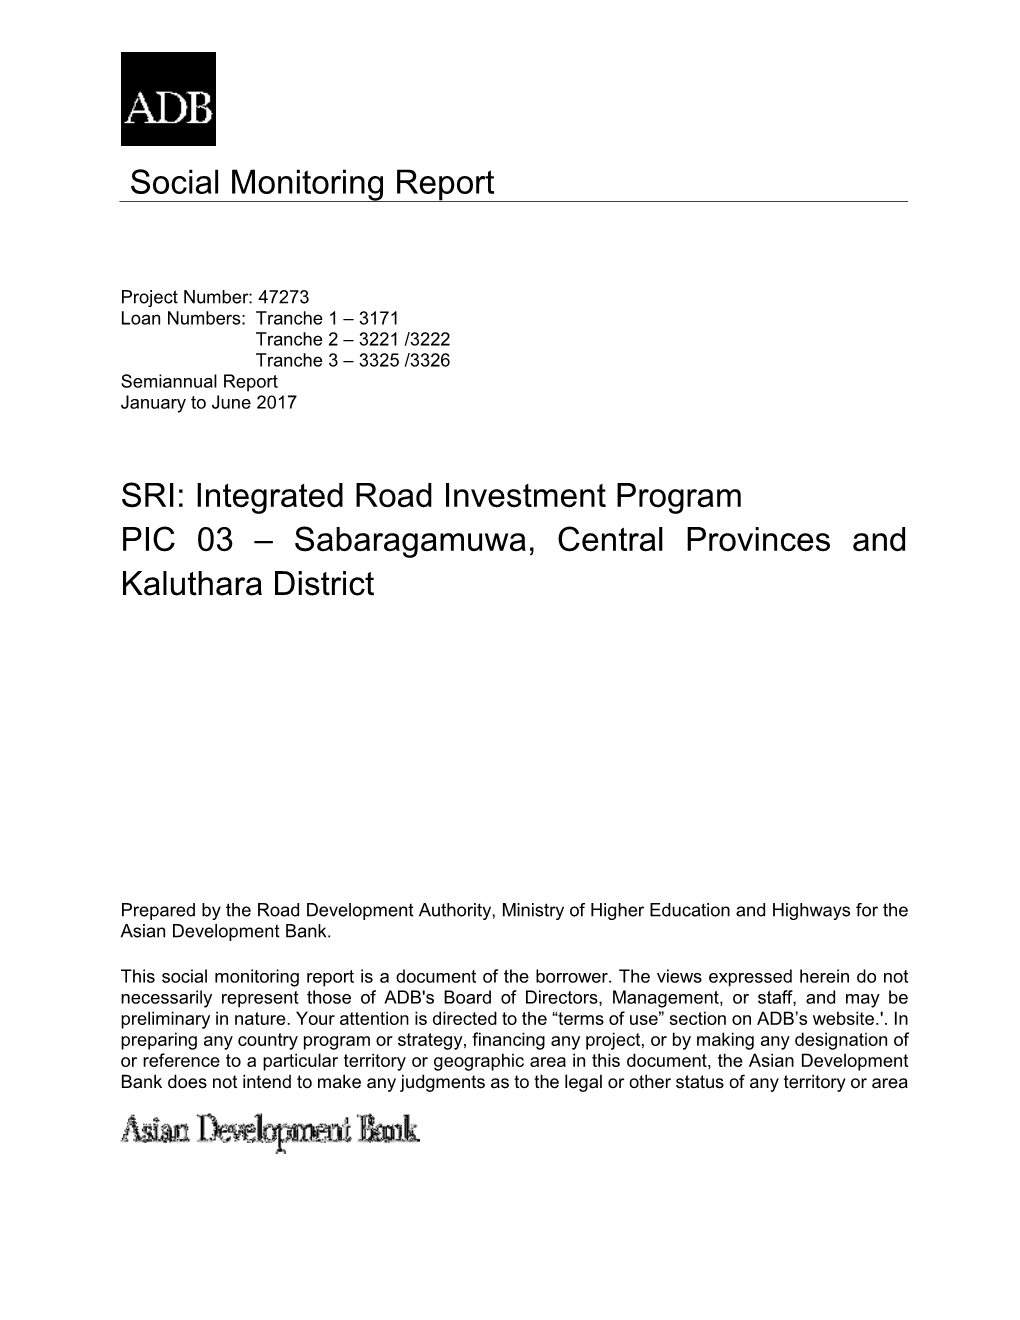 Integrated Road Investment Program PIC 03 – Sabaragamuwa, Central Provinces and Kaluthara District